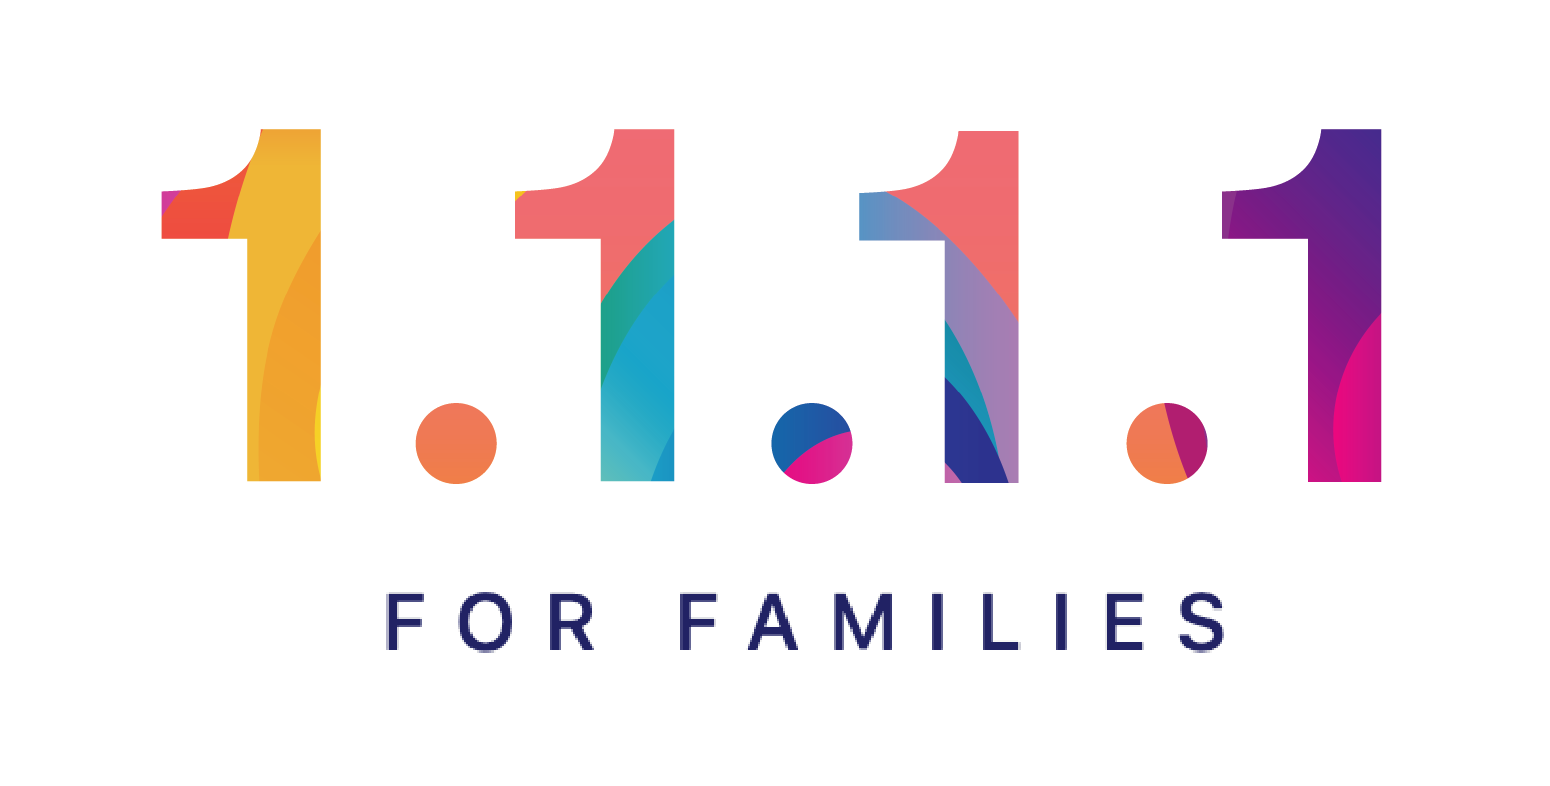 Introducing 1.1.1.1 for Families